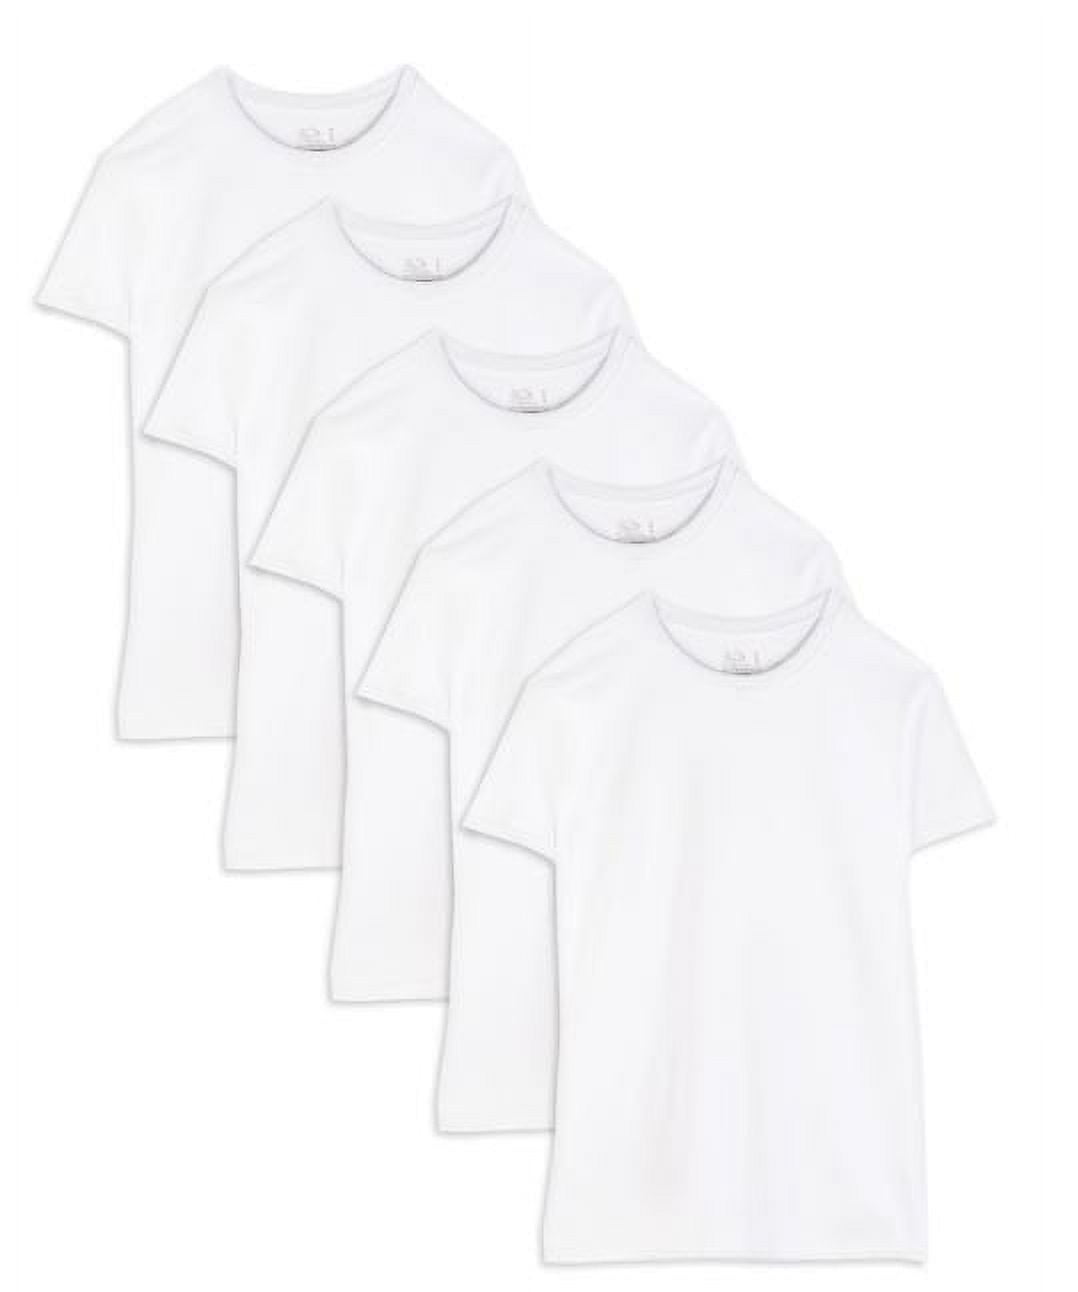 Fruit of the Loom Men's White Crew Neck Undershirts Cotton Tees, 5 Pack ...